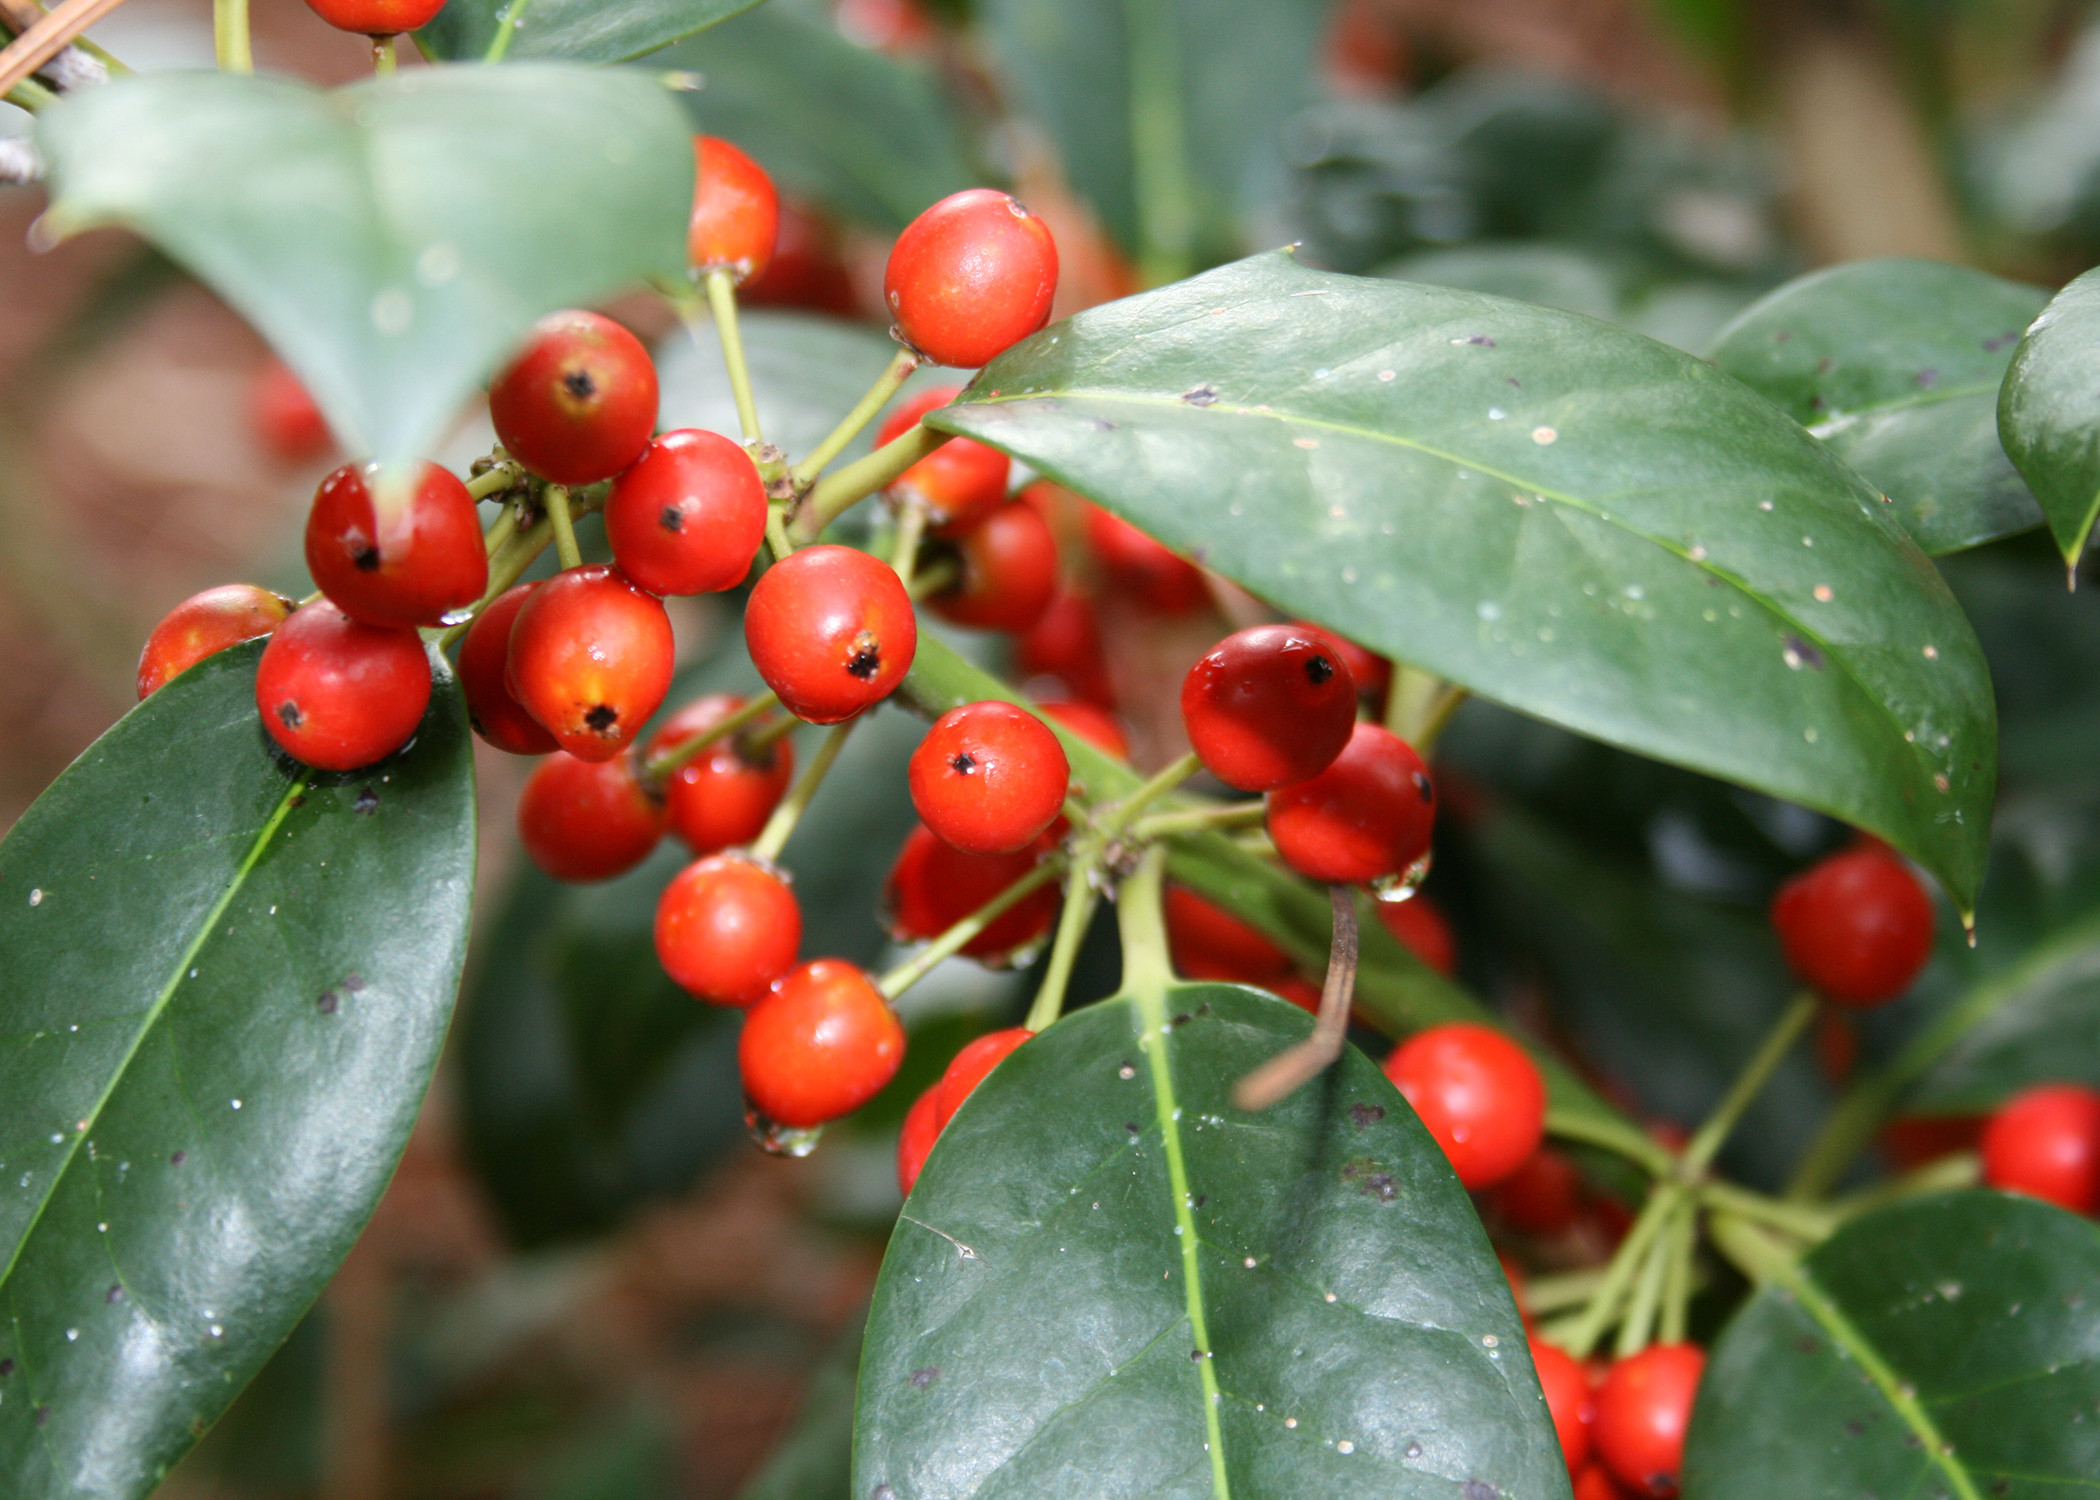 Hollies time berry color for Christmas displays | Mississippi State ...